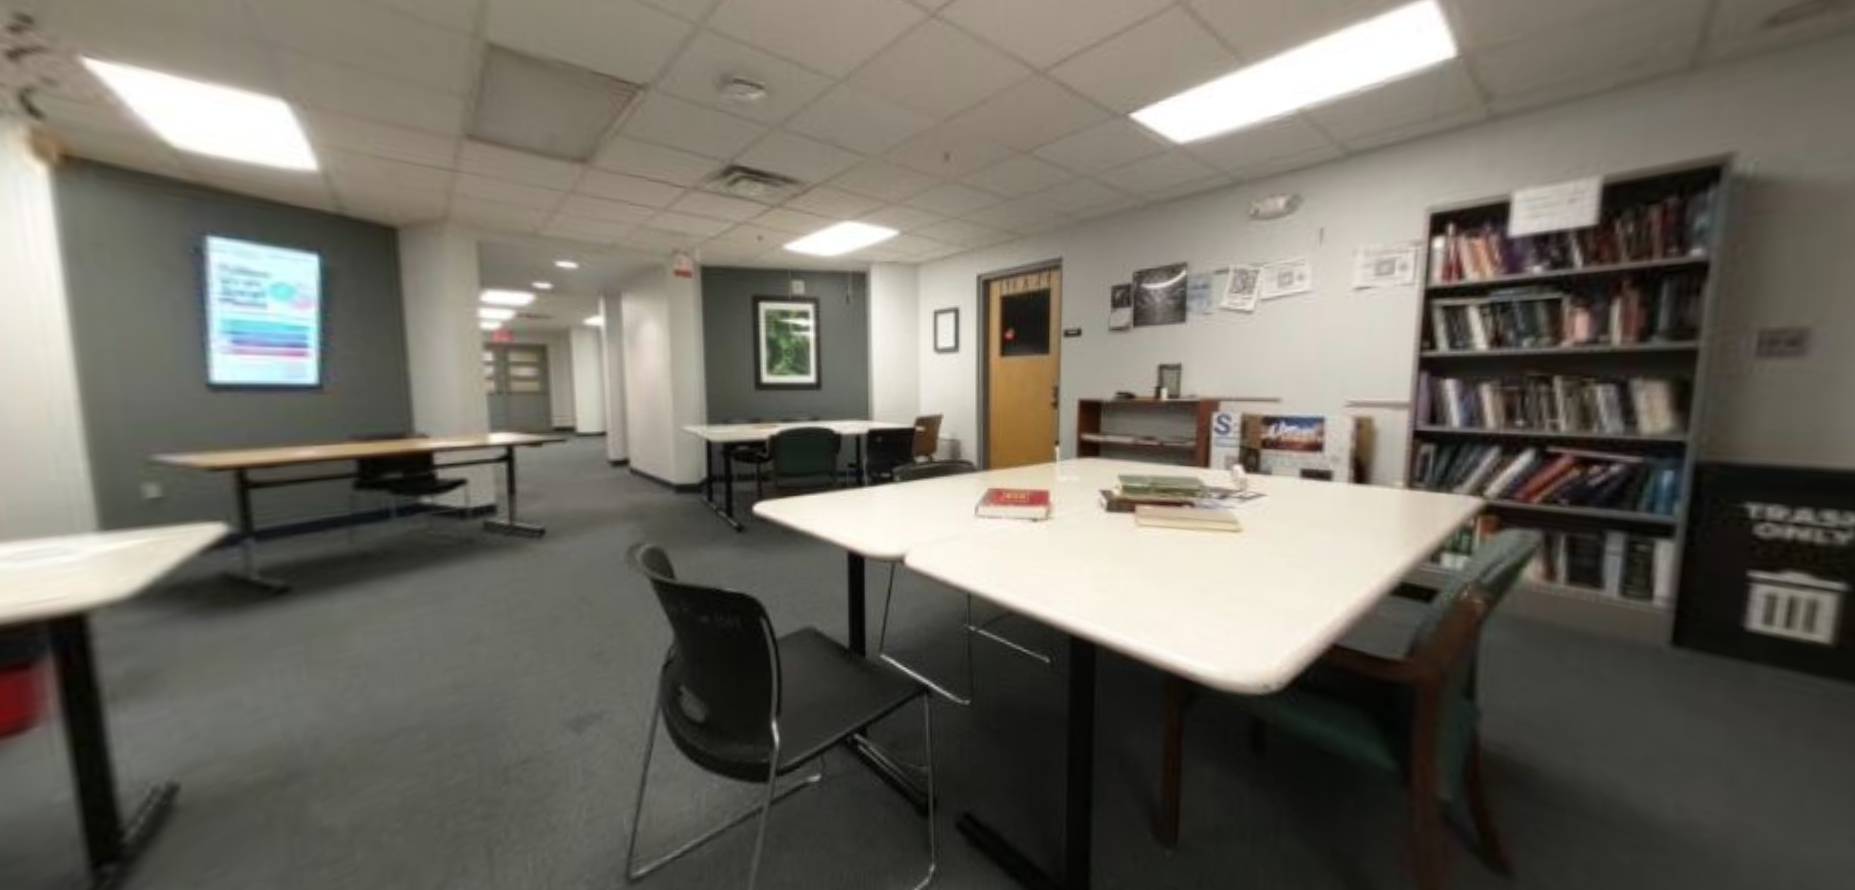 "Before" image of student lounge, dated furniture and lower light, crowded main space.